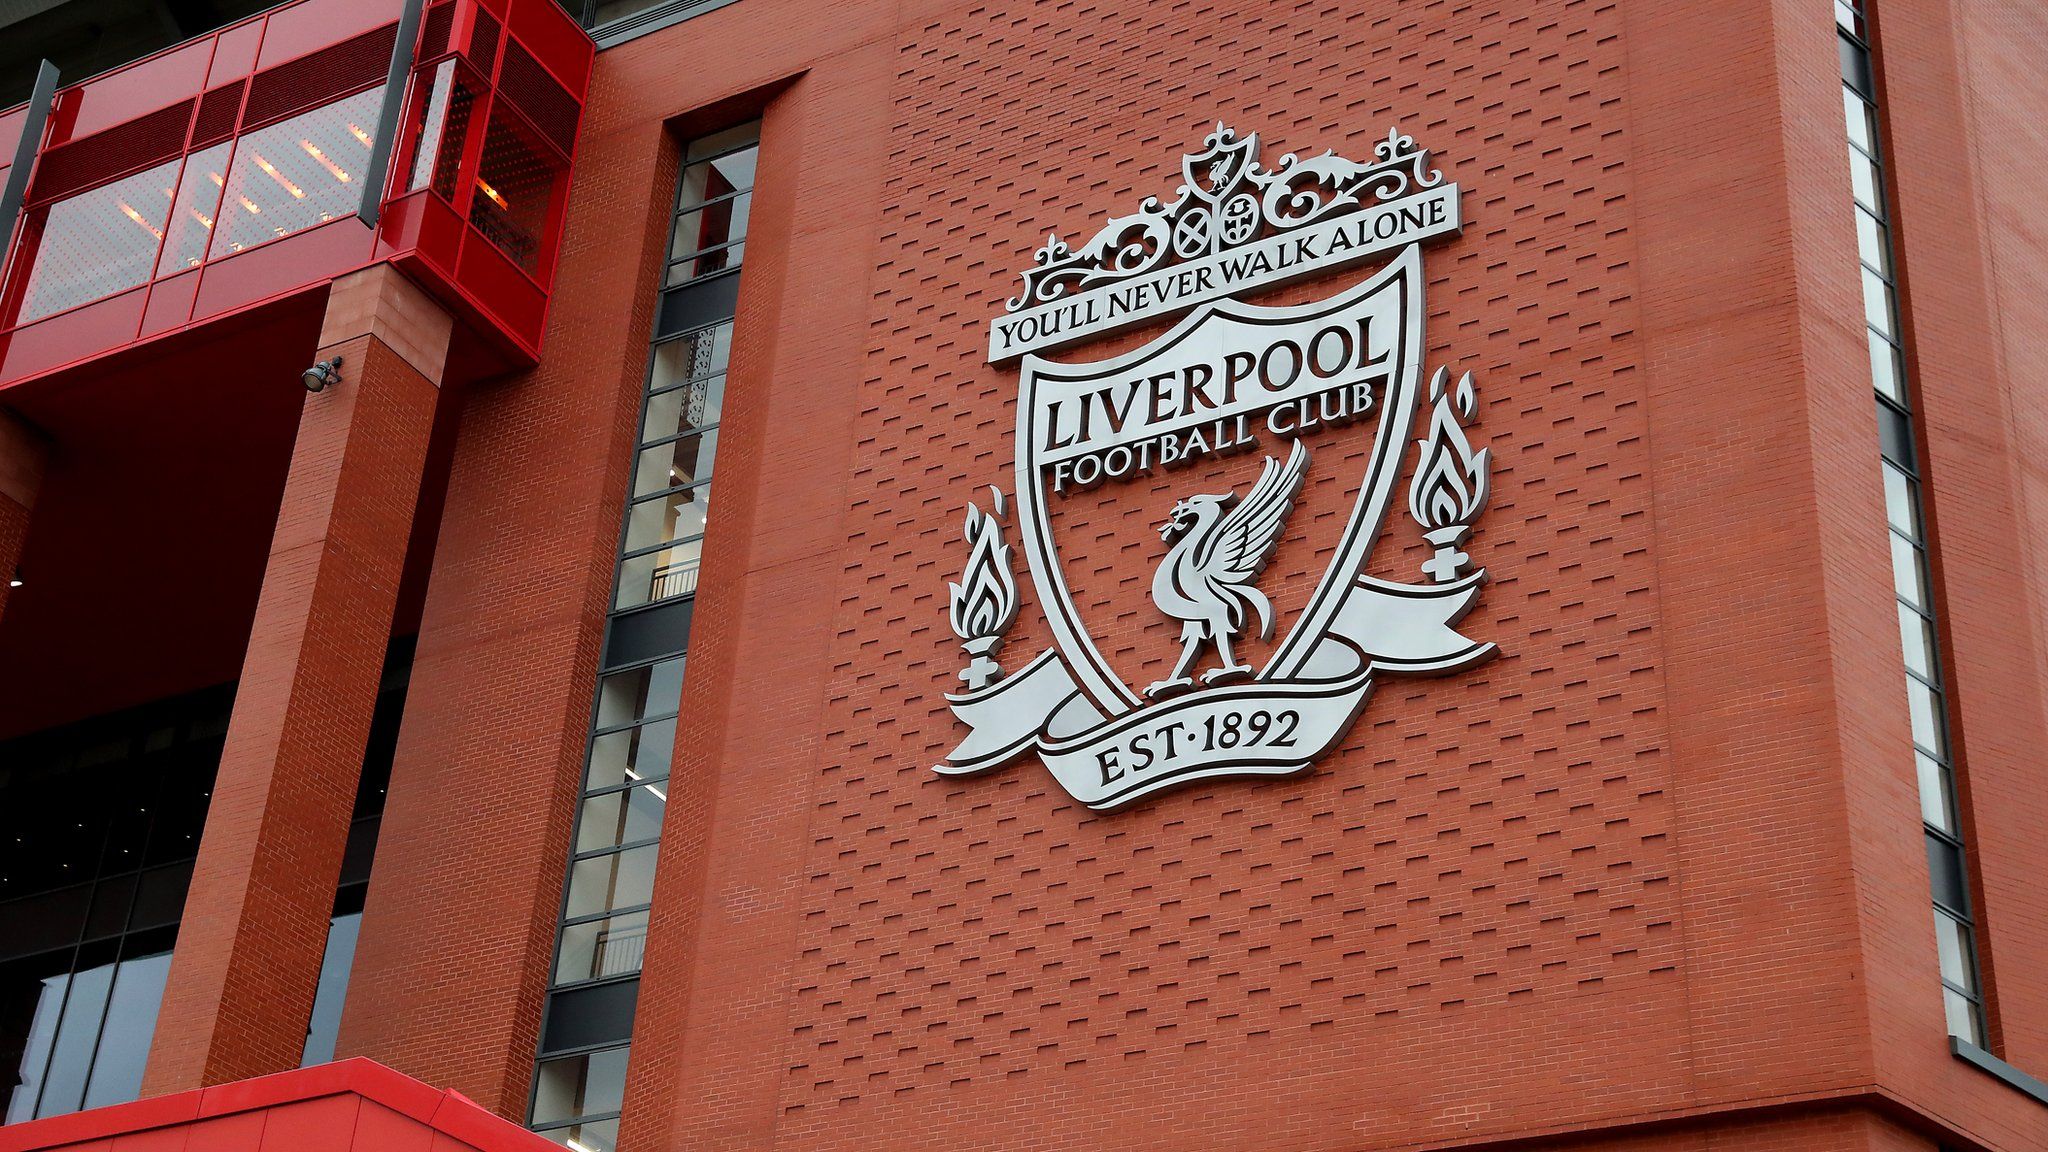 The Liverpool badge on the Anfield Main Stand